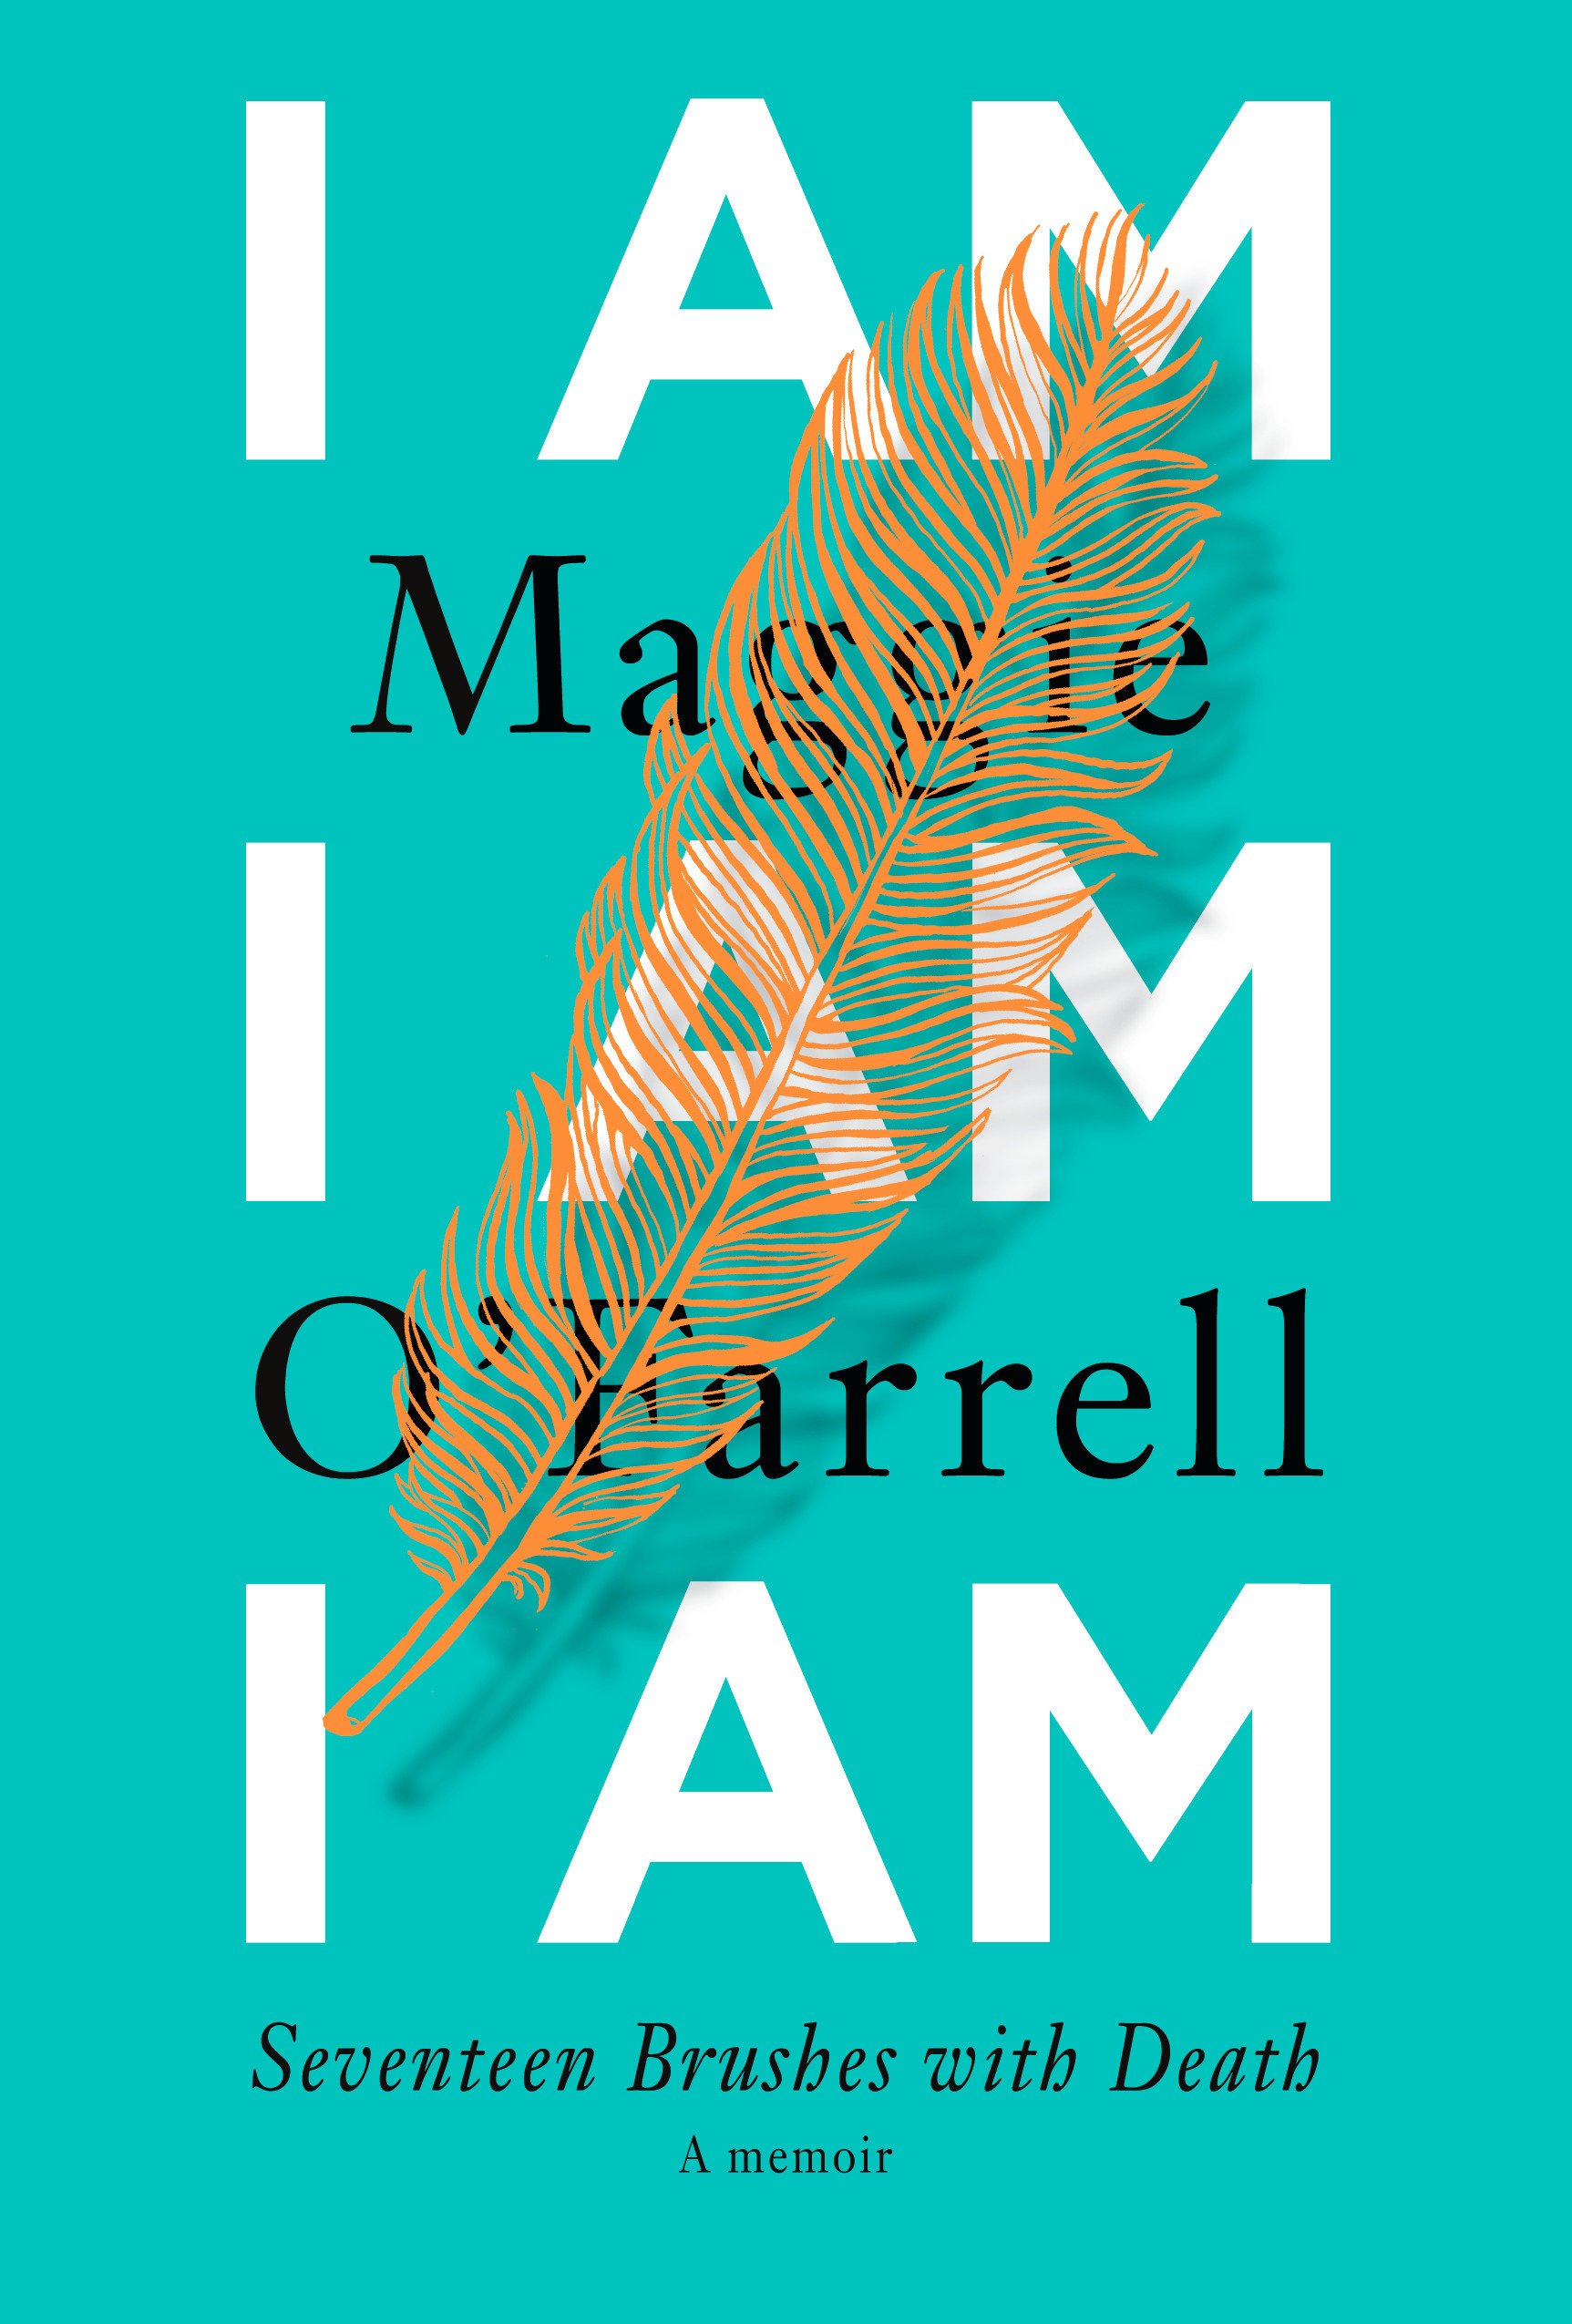 Cover of I Am I Am I Am by Maggie O'Farrell. An orange feather lies on top of text on a solid teal background